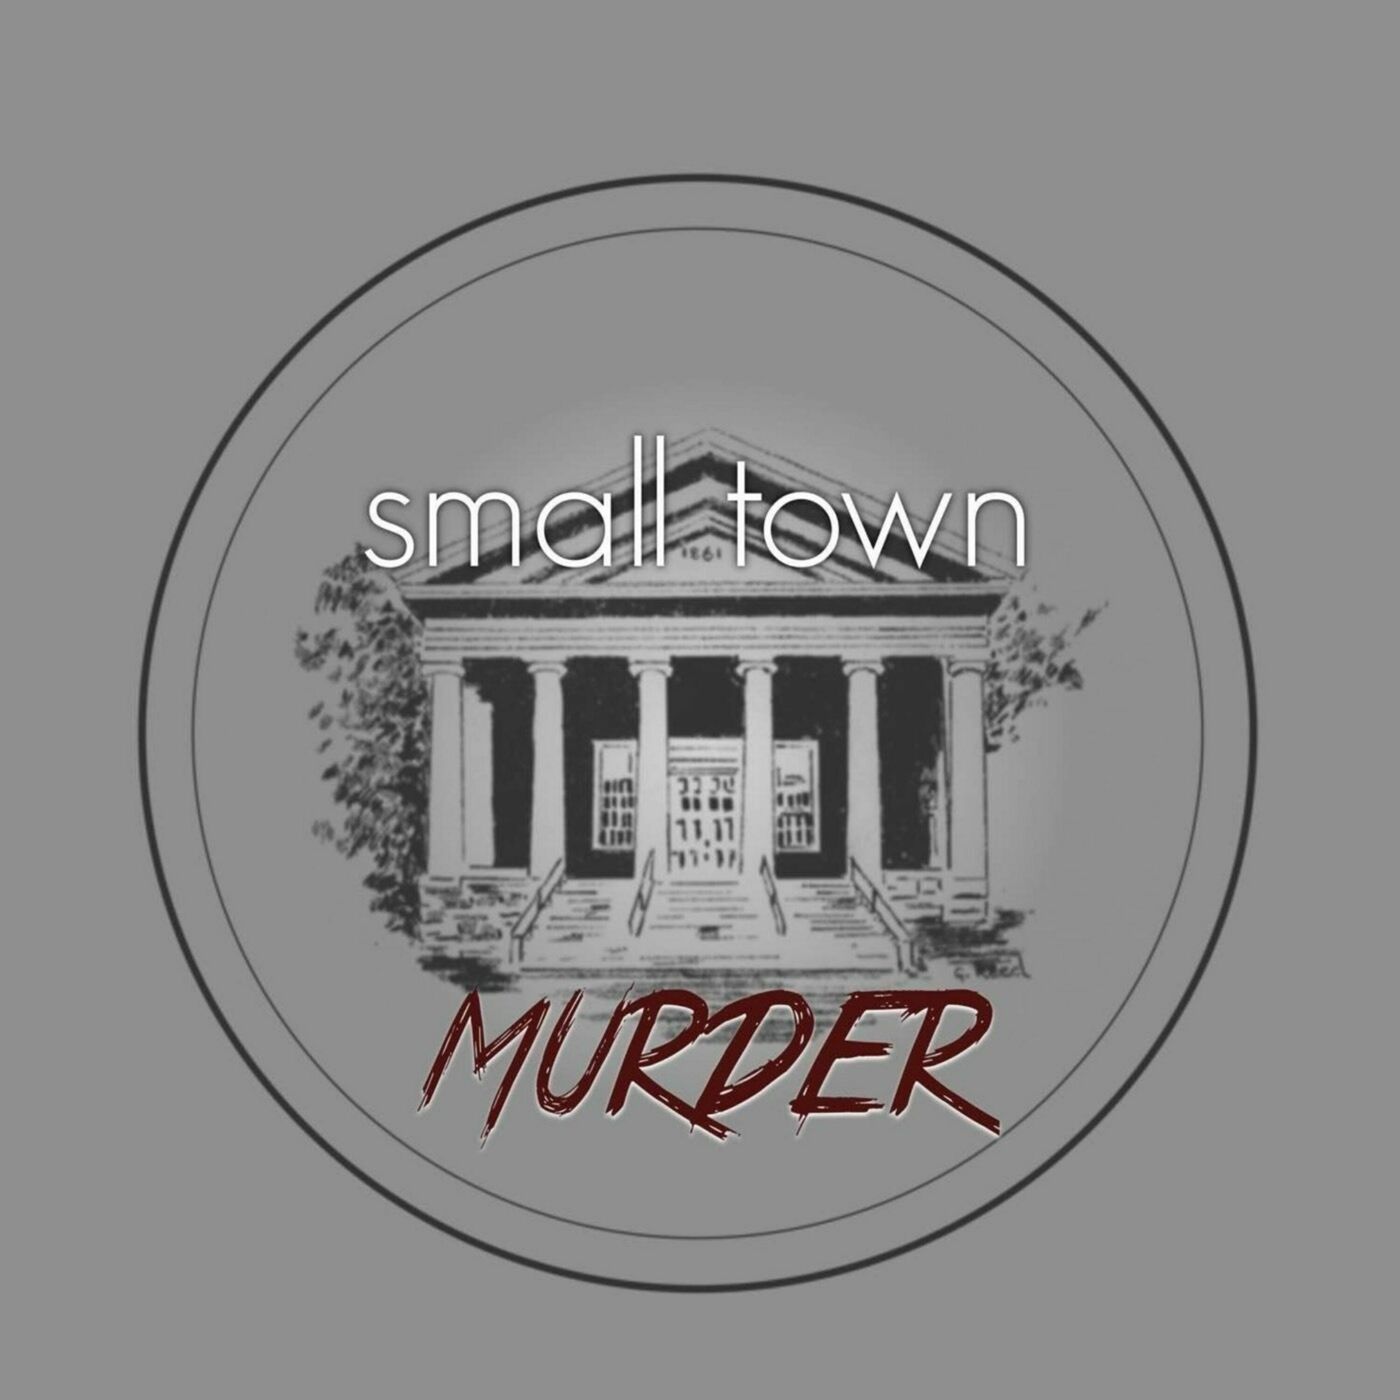 #137 - A Murder Not-So-Mystery Weekend in St. Michaels, Maryland